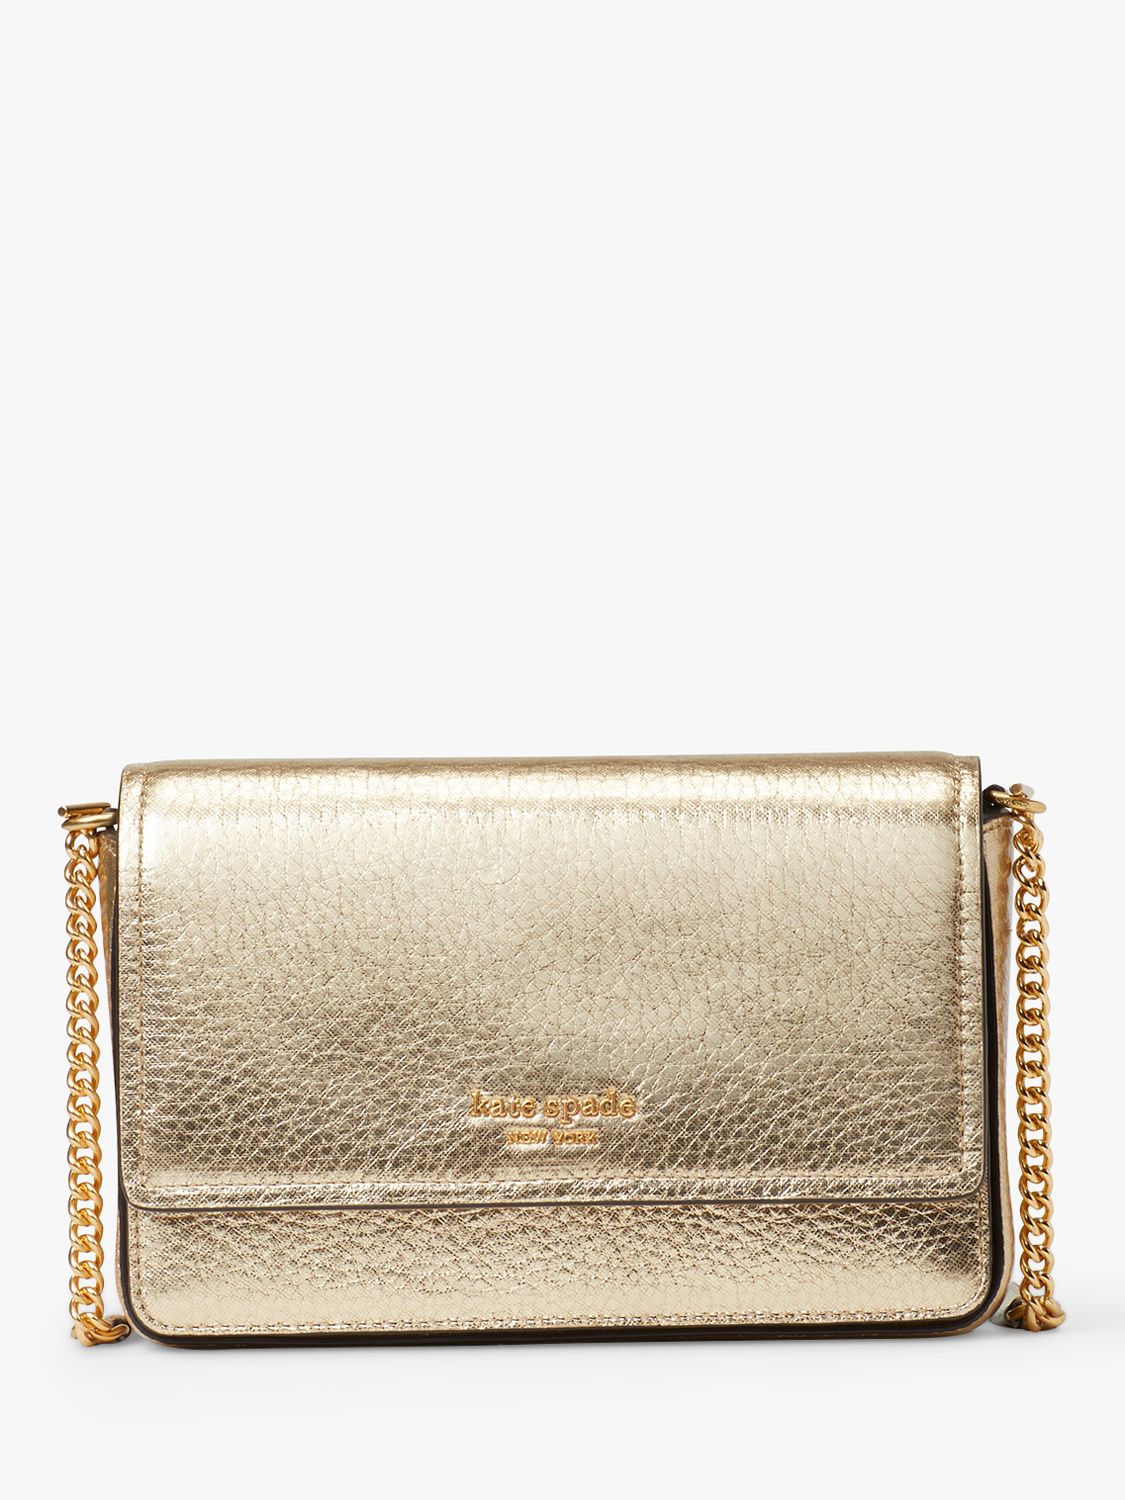 kate spade new york Leather Flapover Chain Cross Body Bag, Gold